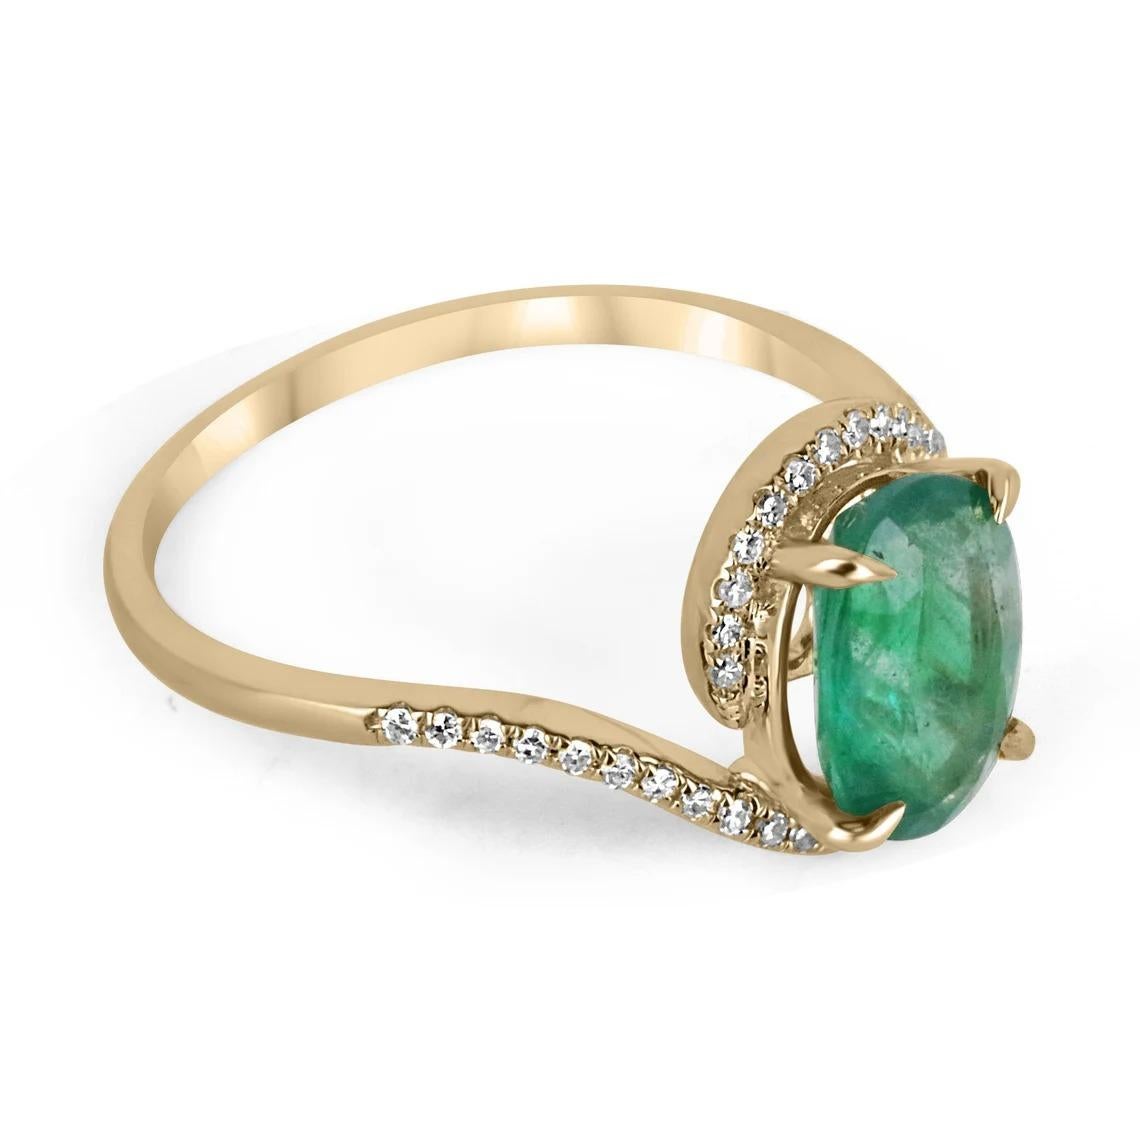 A beautiful, oval emerald and diamond ladies' ring. The center gemstone features a lovely 1.65-carat, natural oval-cut emerald with remarkable qualities. Carefully prong set, with micro-pave set diamonds accenting the bypass shank. Crafted in